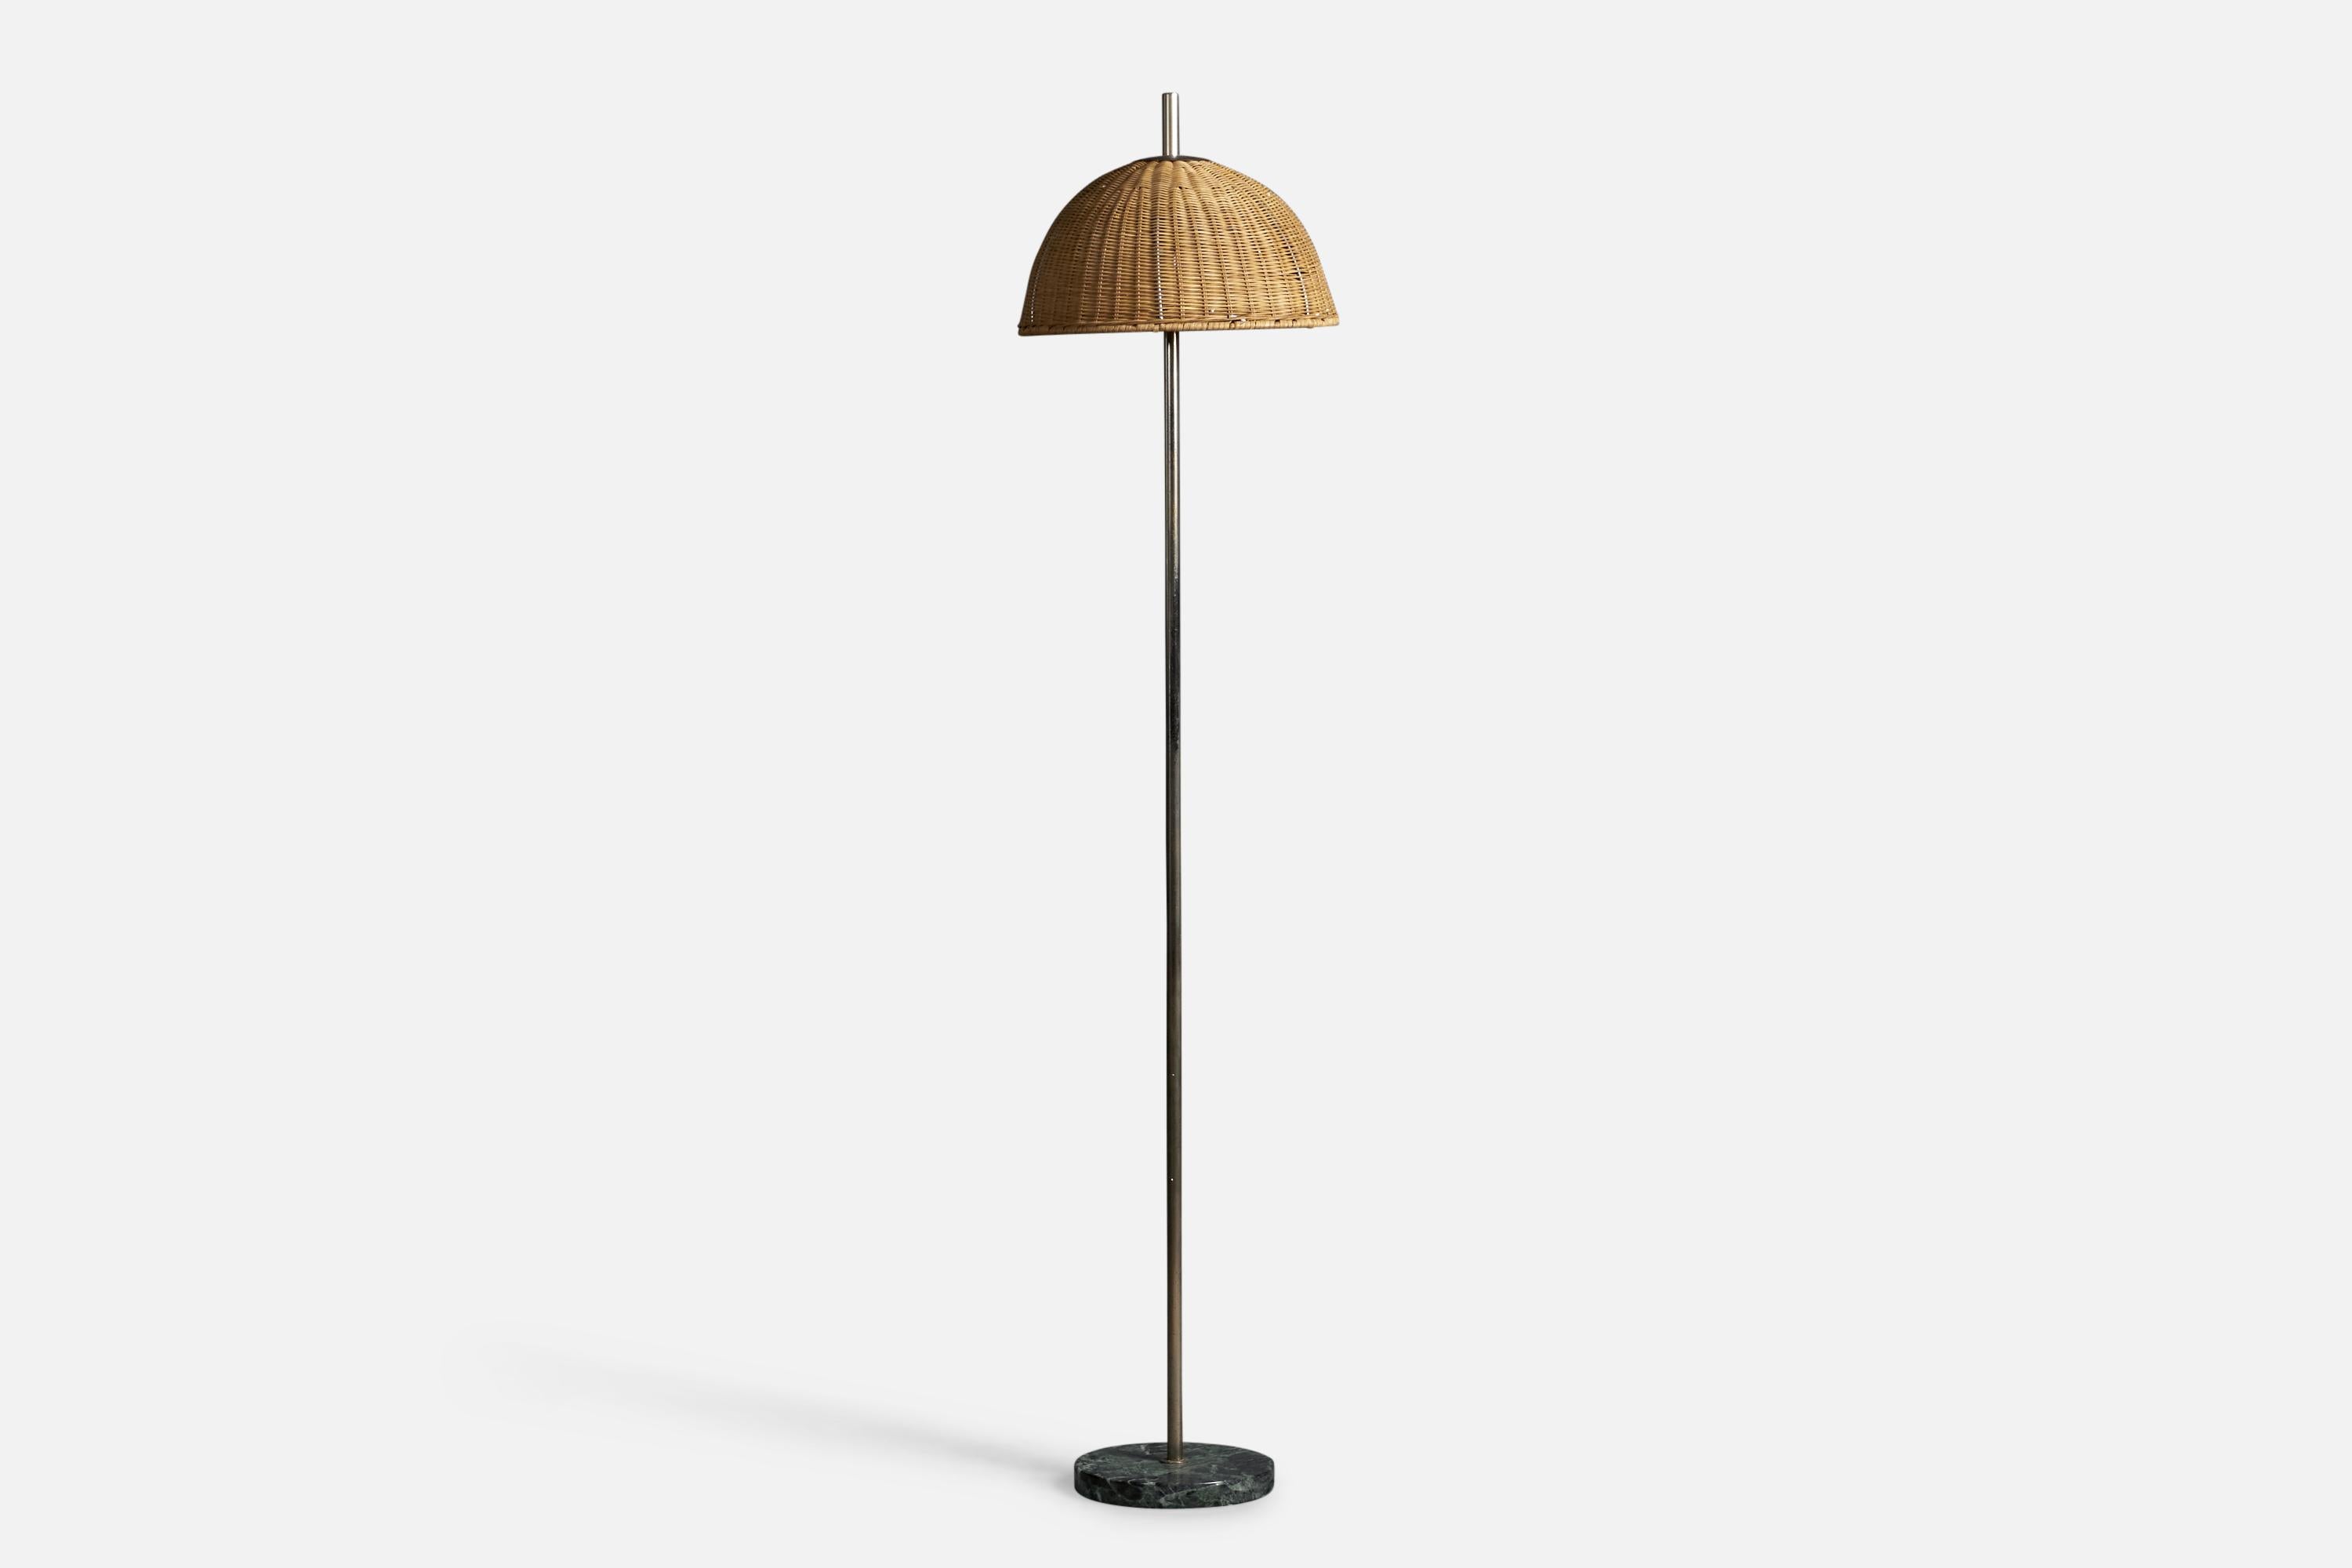 A brass, marble and rattan floor lamp, designed and produced in Italy, 1950s

E-26 bulb - two sockets